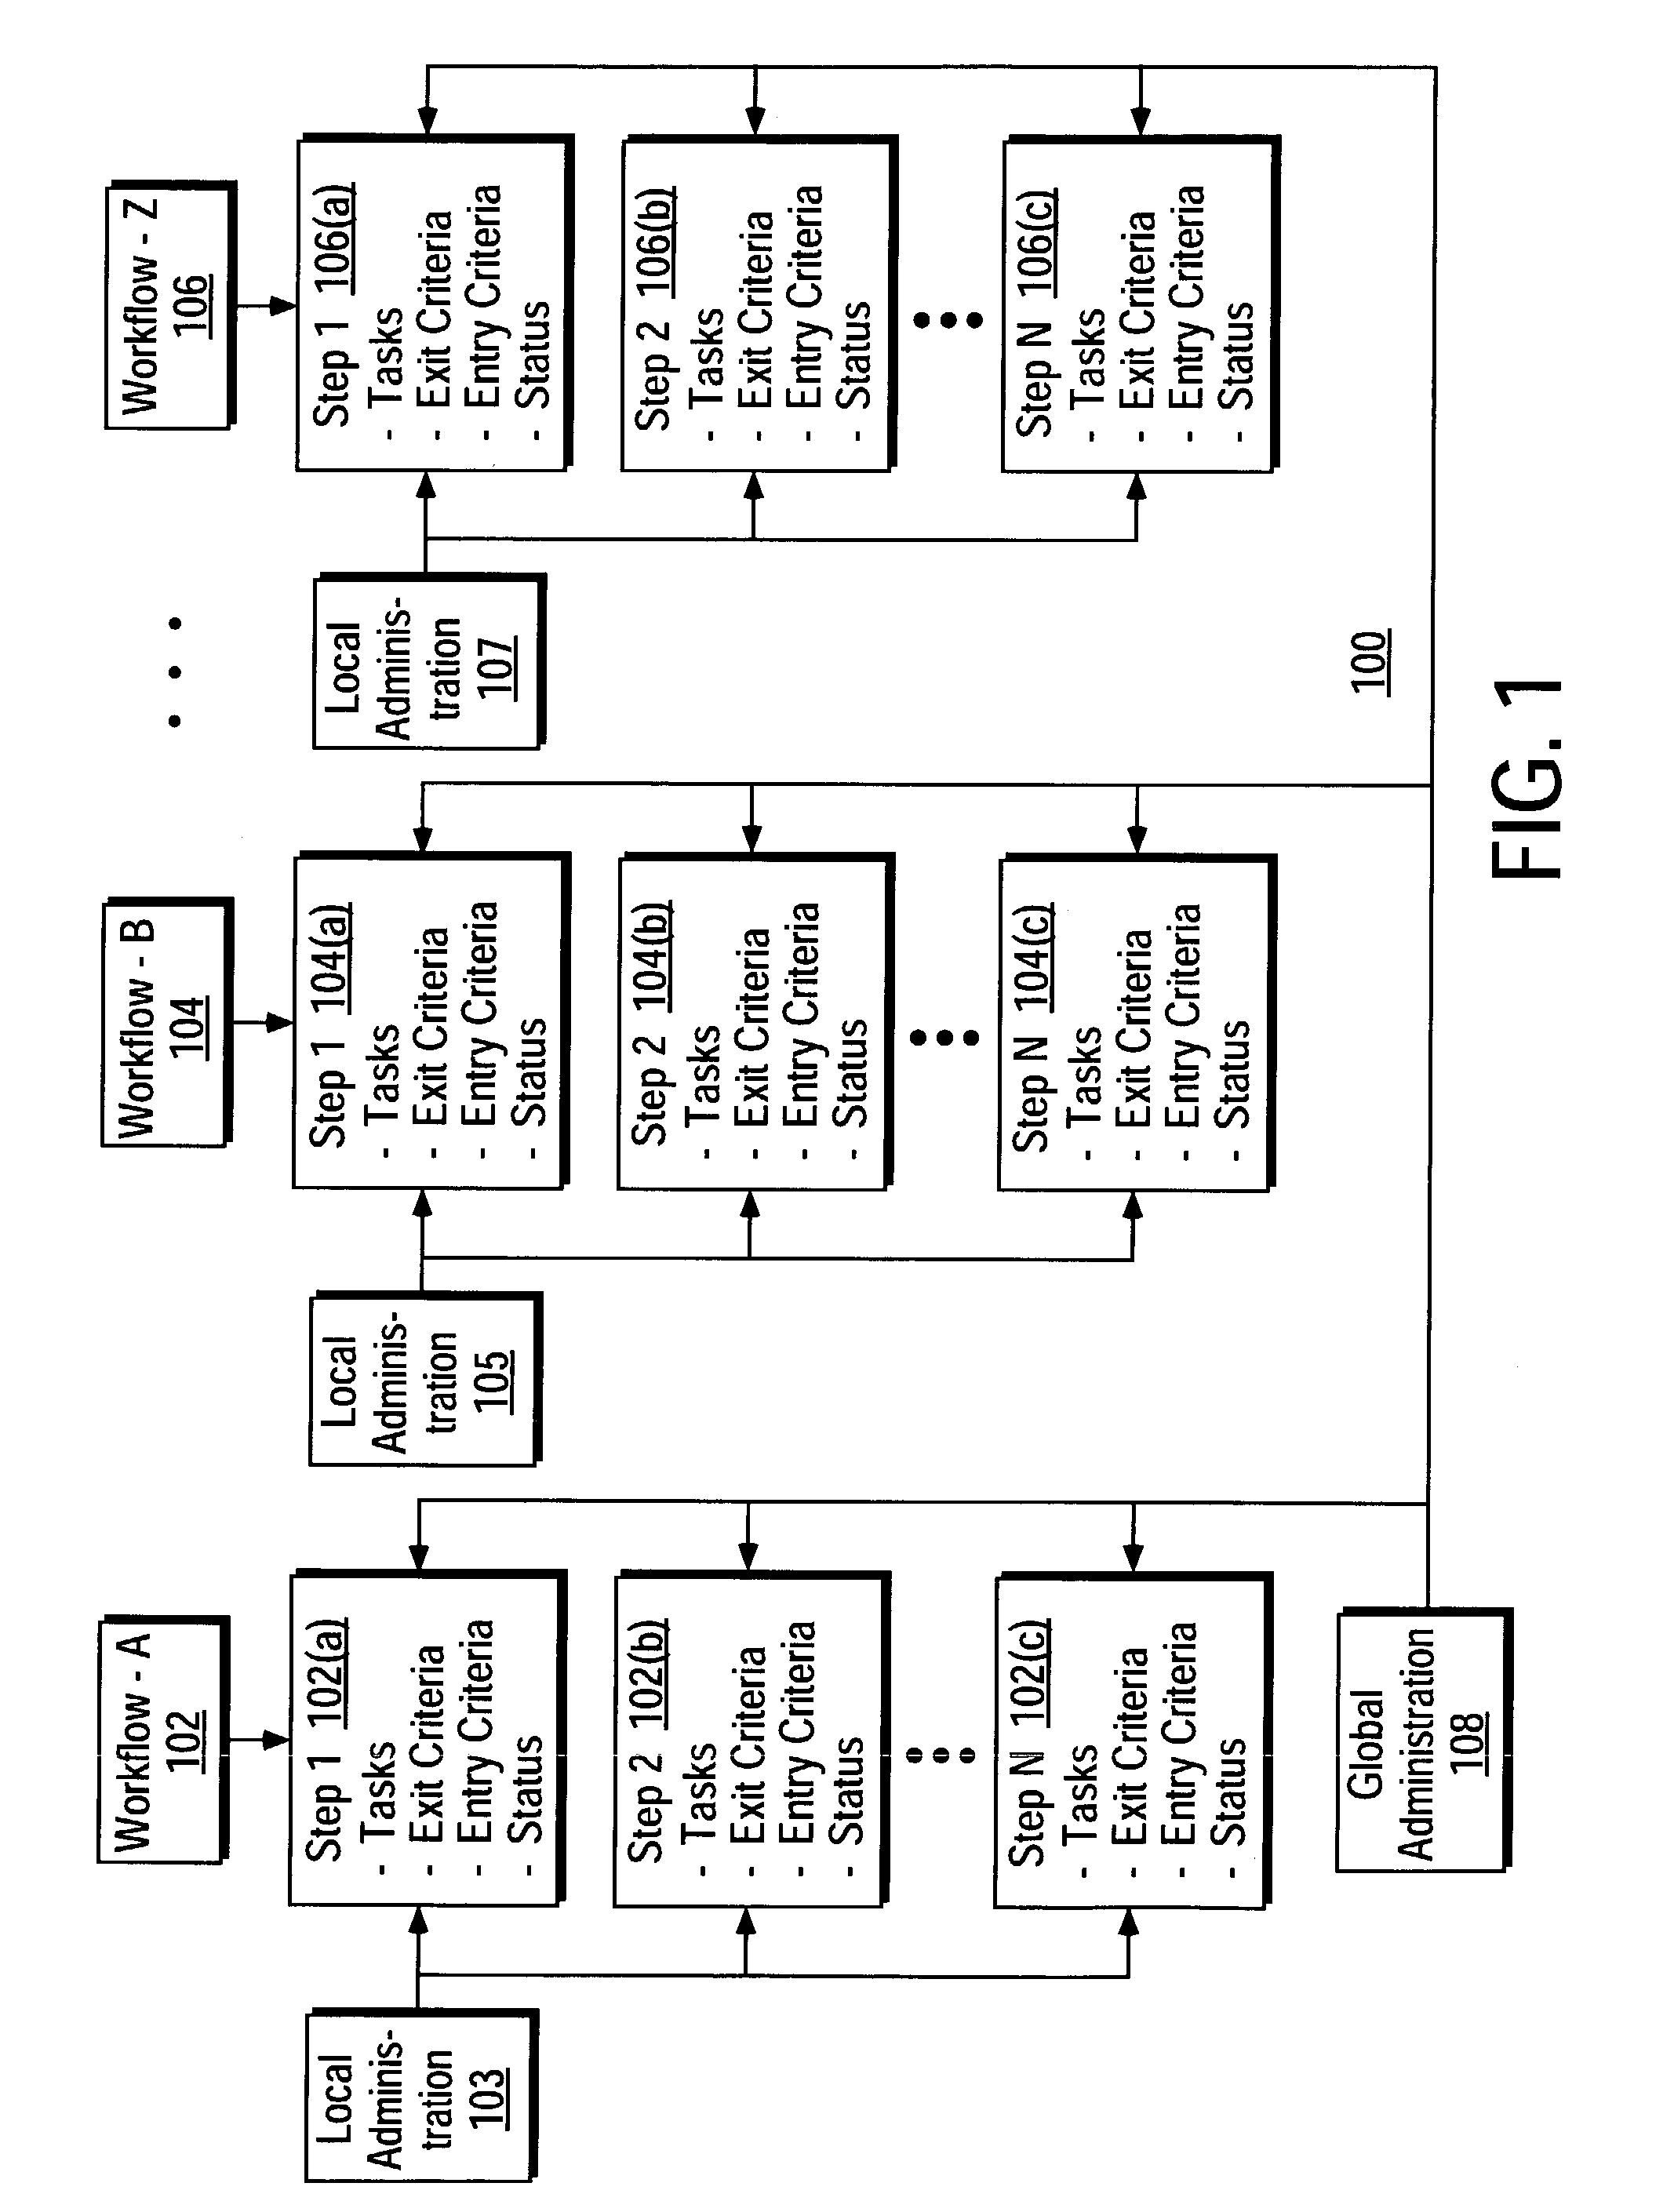 System and method for managing and monitoring multiple workflows